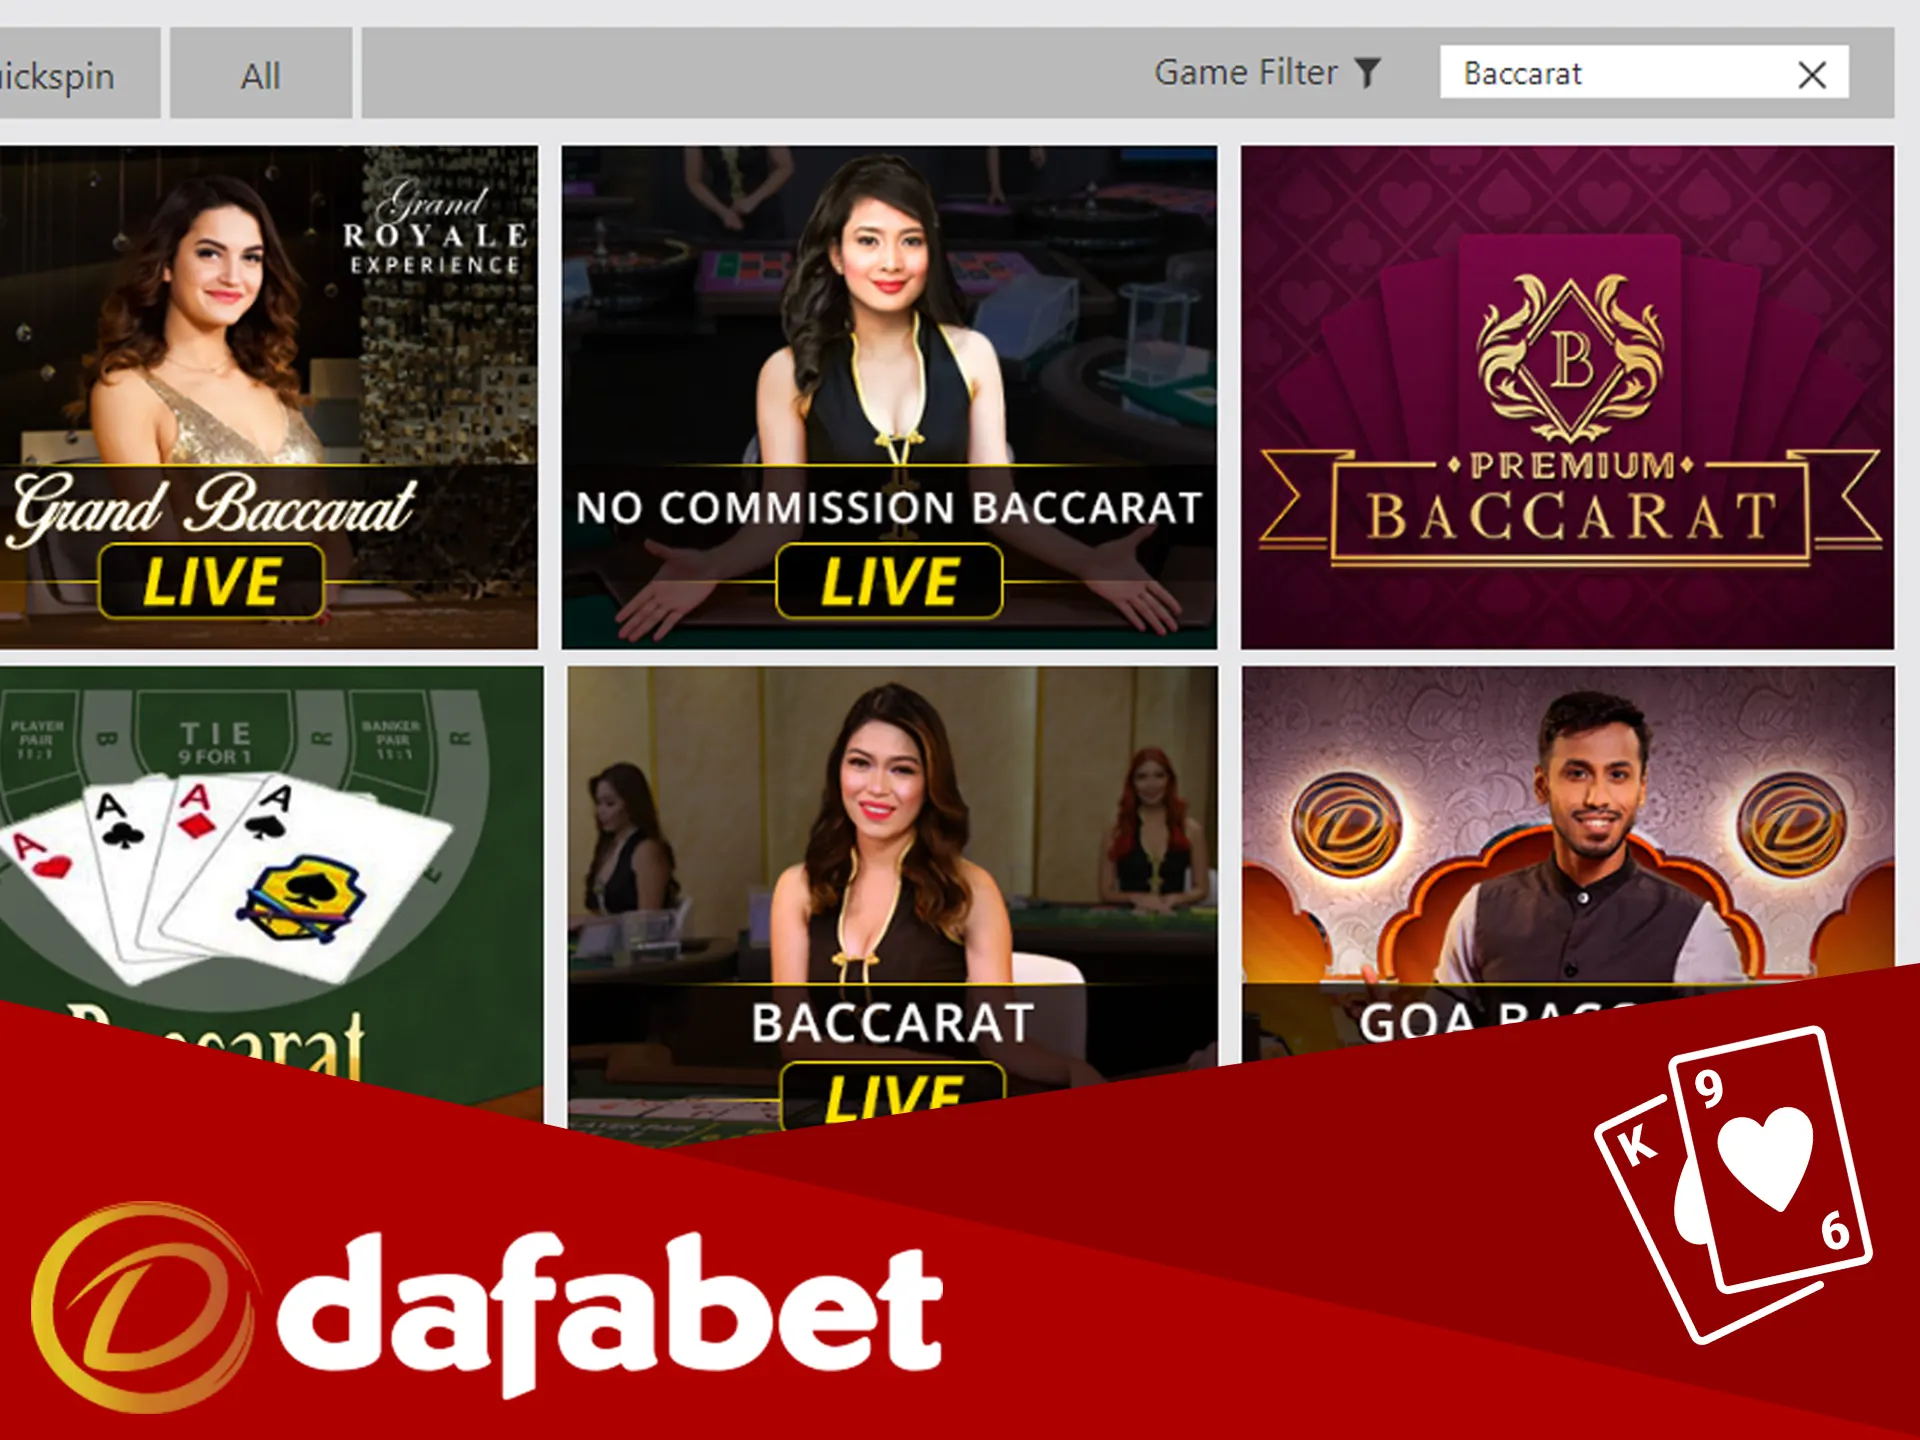 Try yourself playing amazing baccarat games at Dafabet.